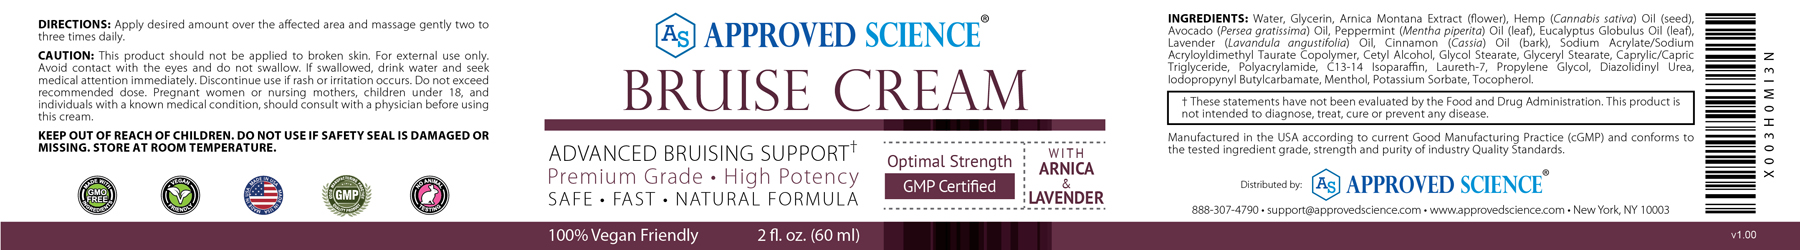 Approved Science® Bruise Cream Supplement Facts